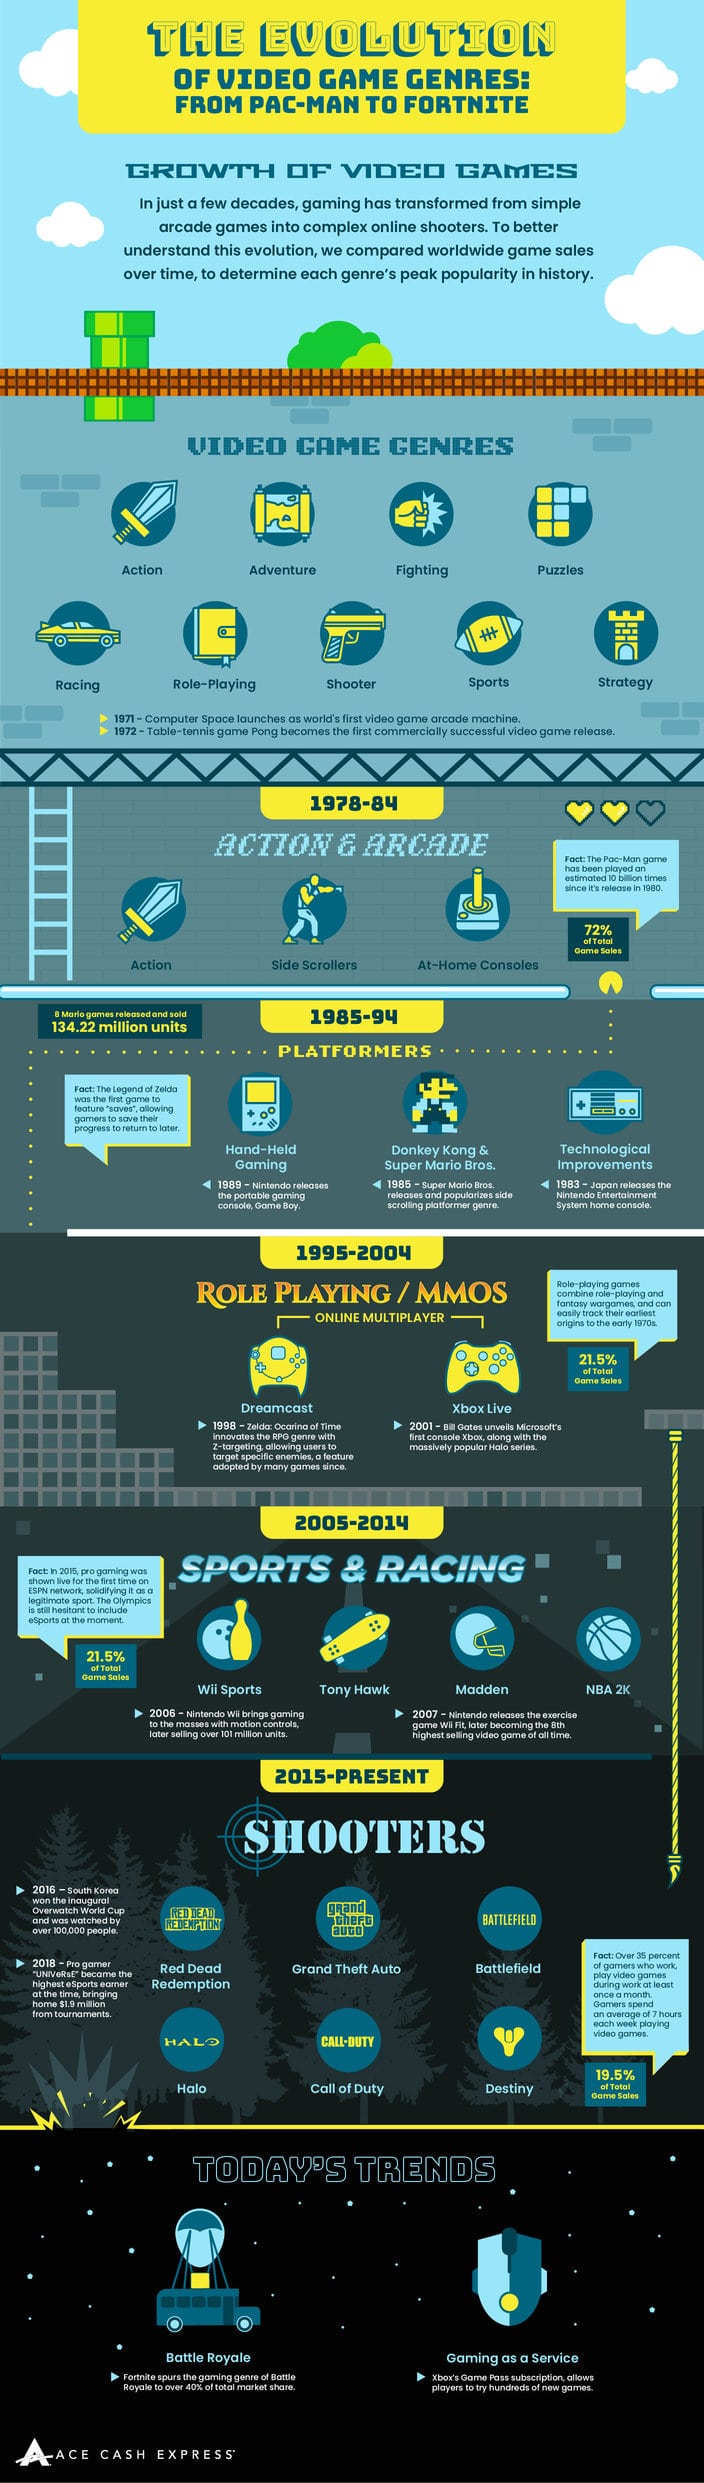 The Evolution of Video Game Genres: From Pac-man to Fortnite Infographic